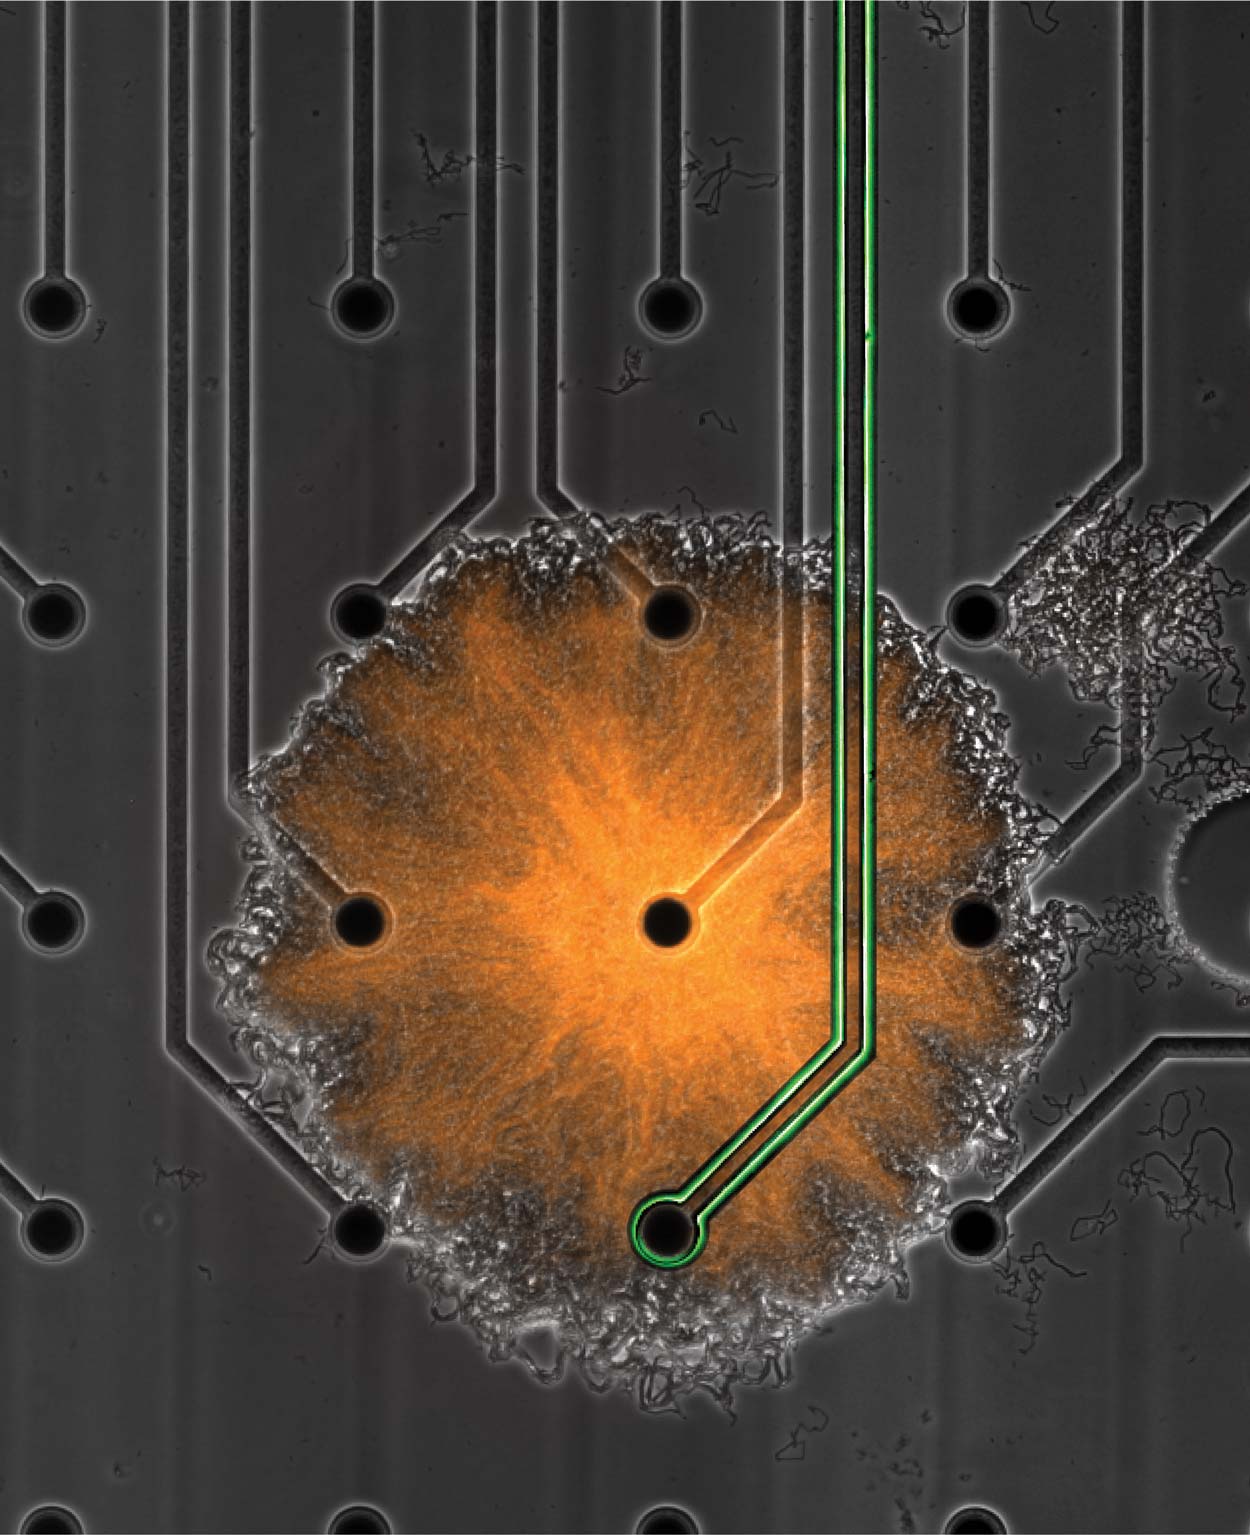 orange circle (biofilm) surrounded by black circles(microelectrode array) with a green track(microelectrode) going into the orange circle